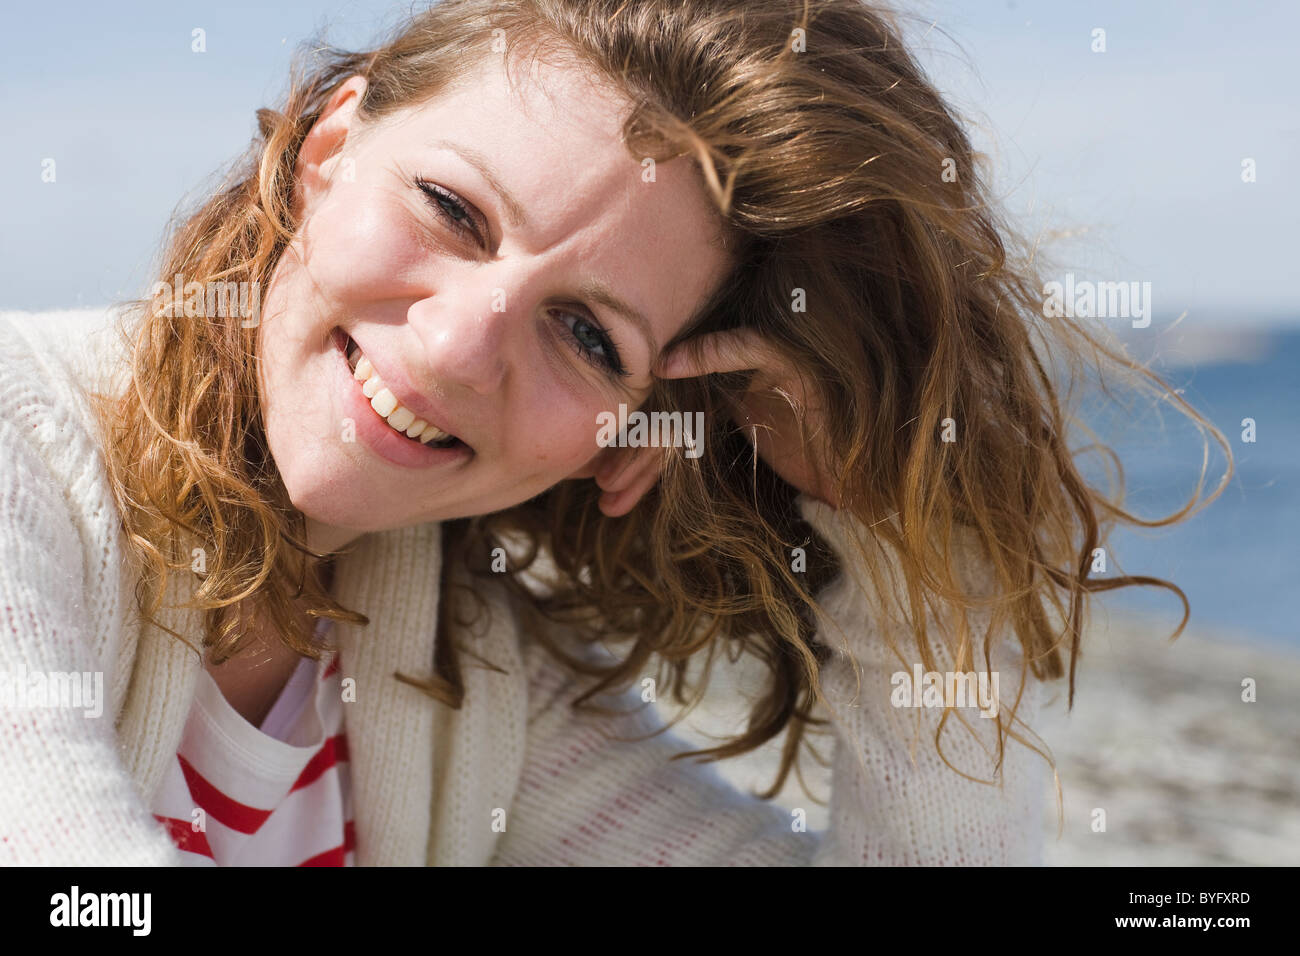 Portrait of mid adult woman smiling Stock Photo